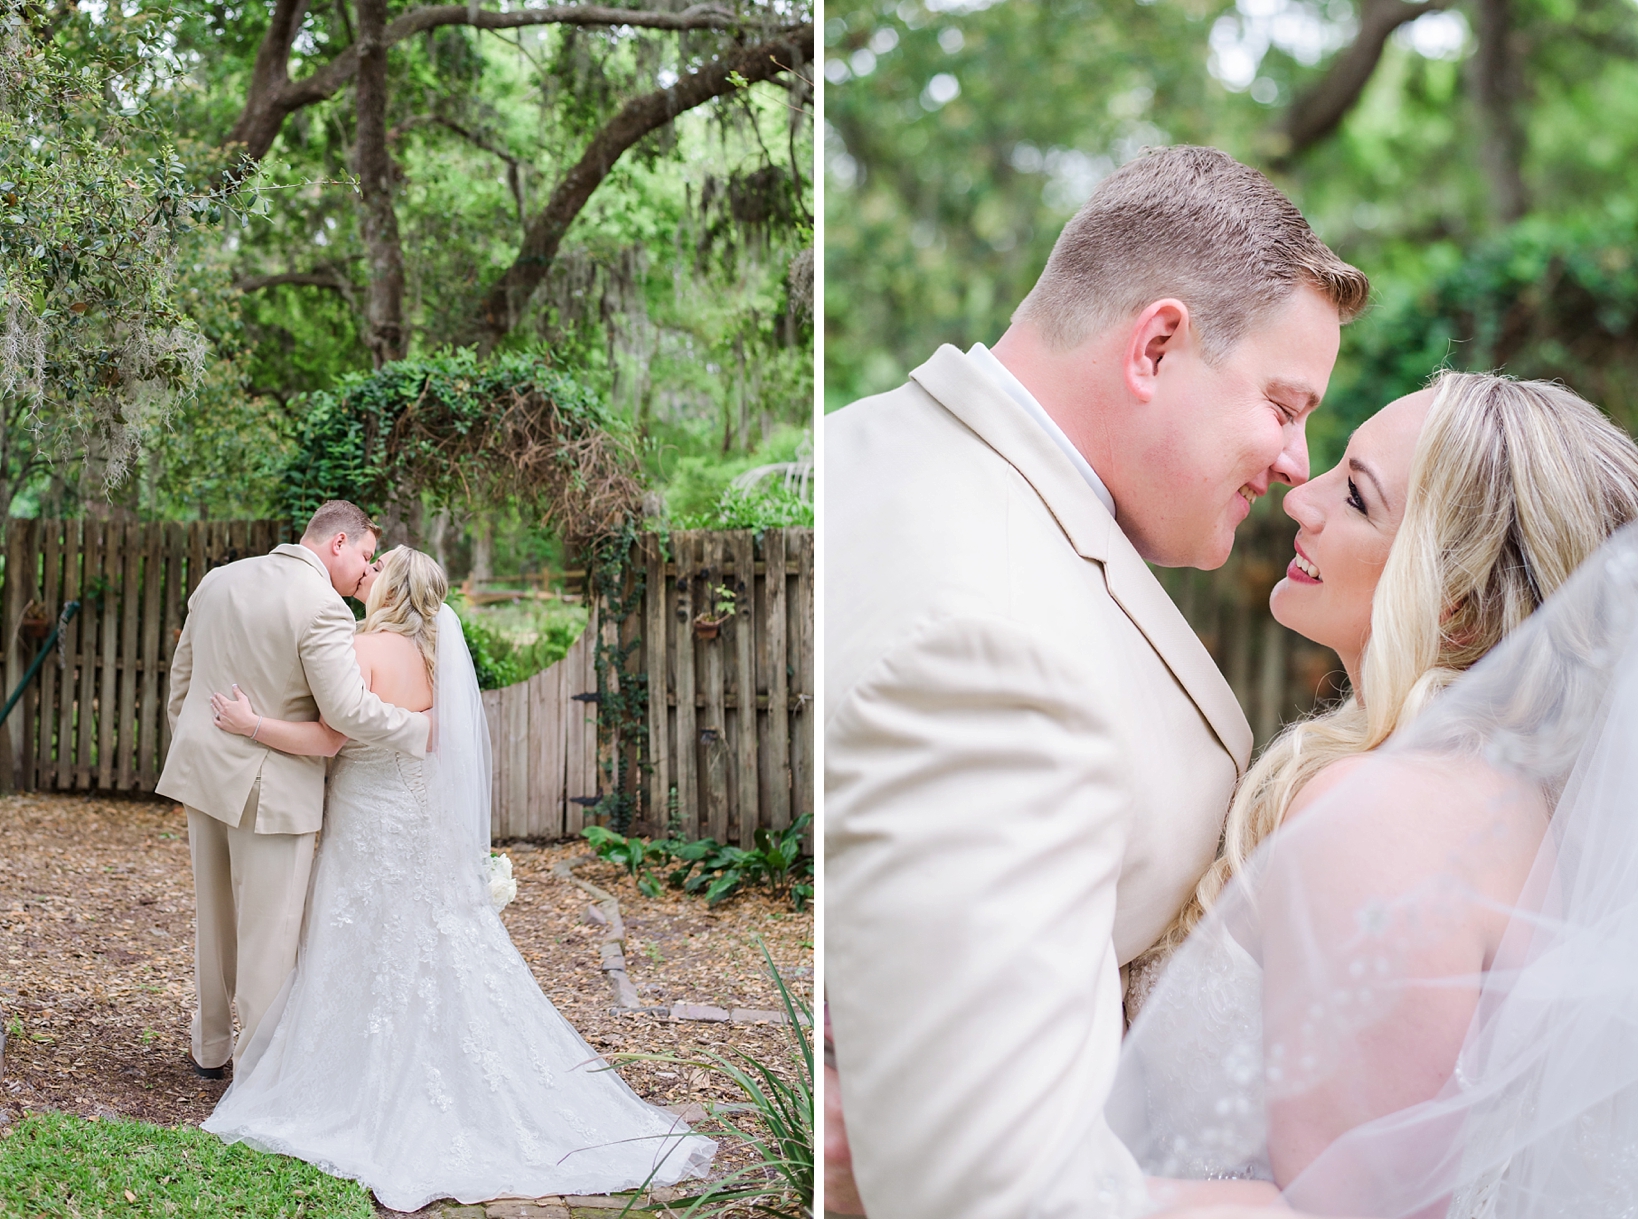 Bride and groom on their wedding day surrounded by old florida greenery